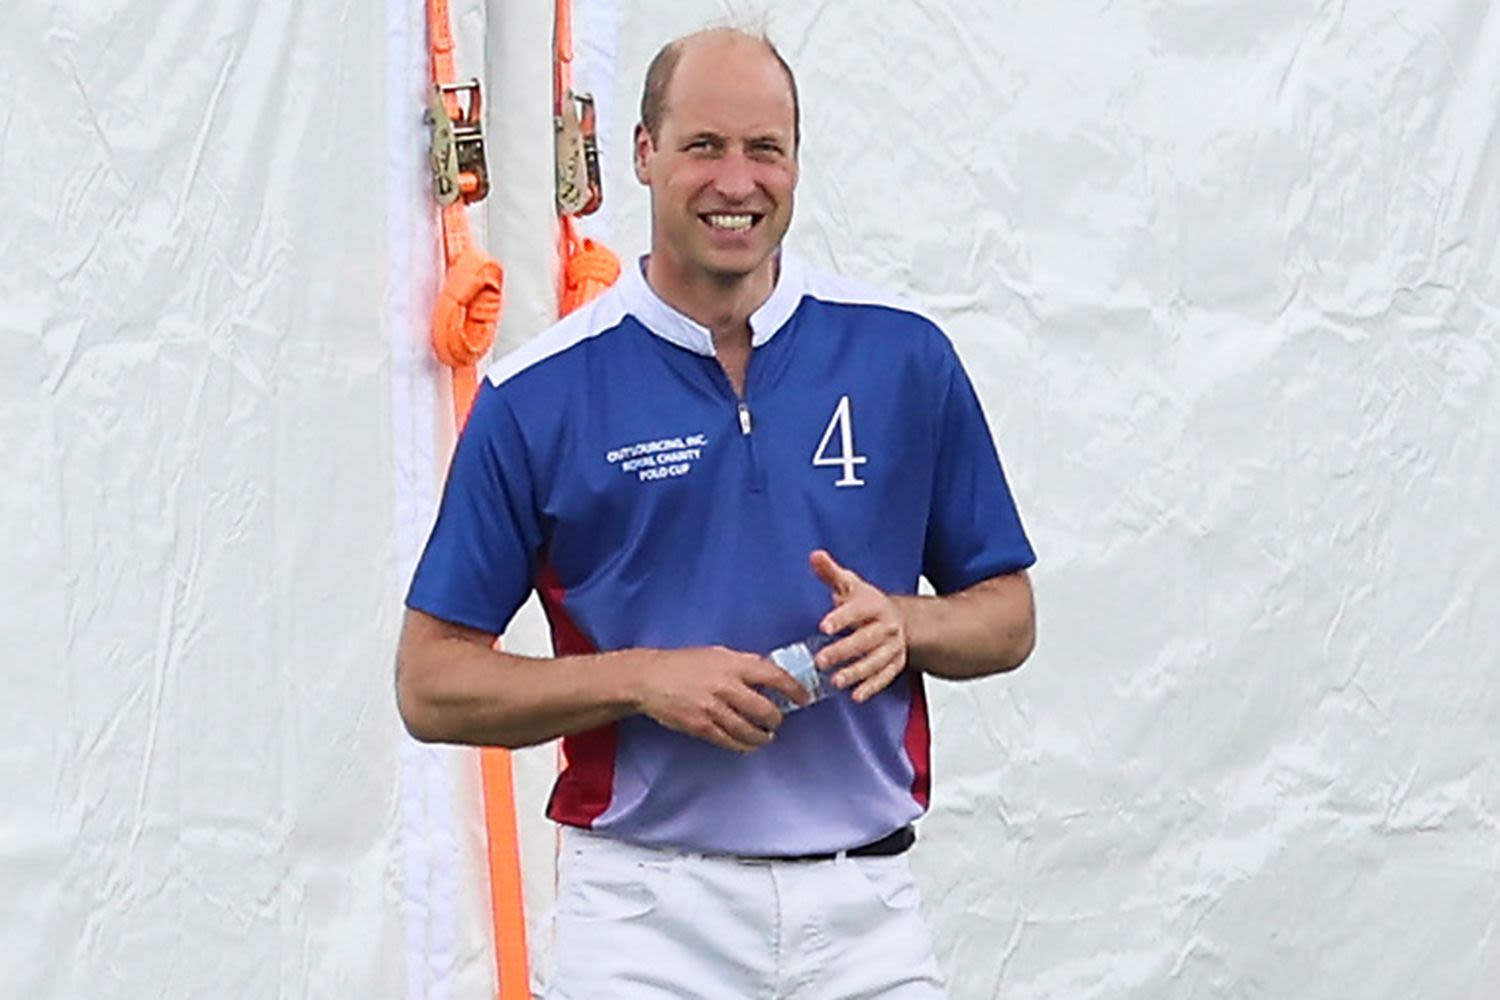 Prince William Competes in Polo Match as Kate Middleton Misses Event amid Wimbledon Appearance Speculation